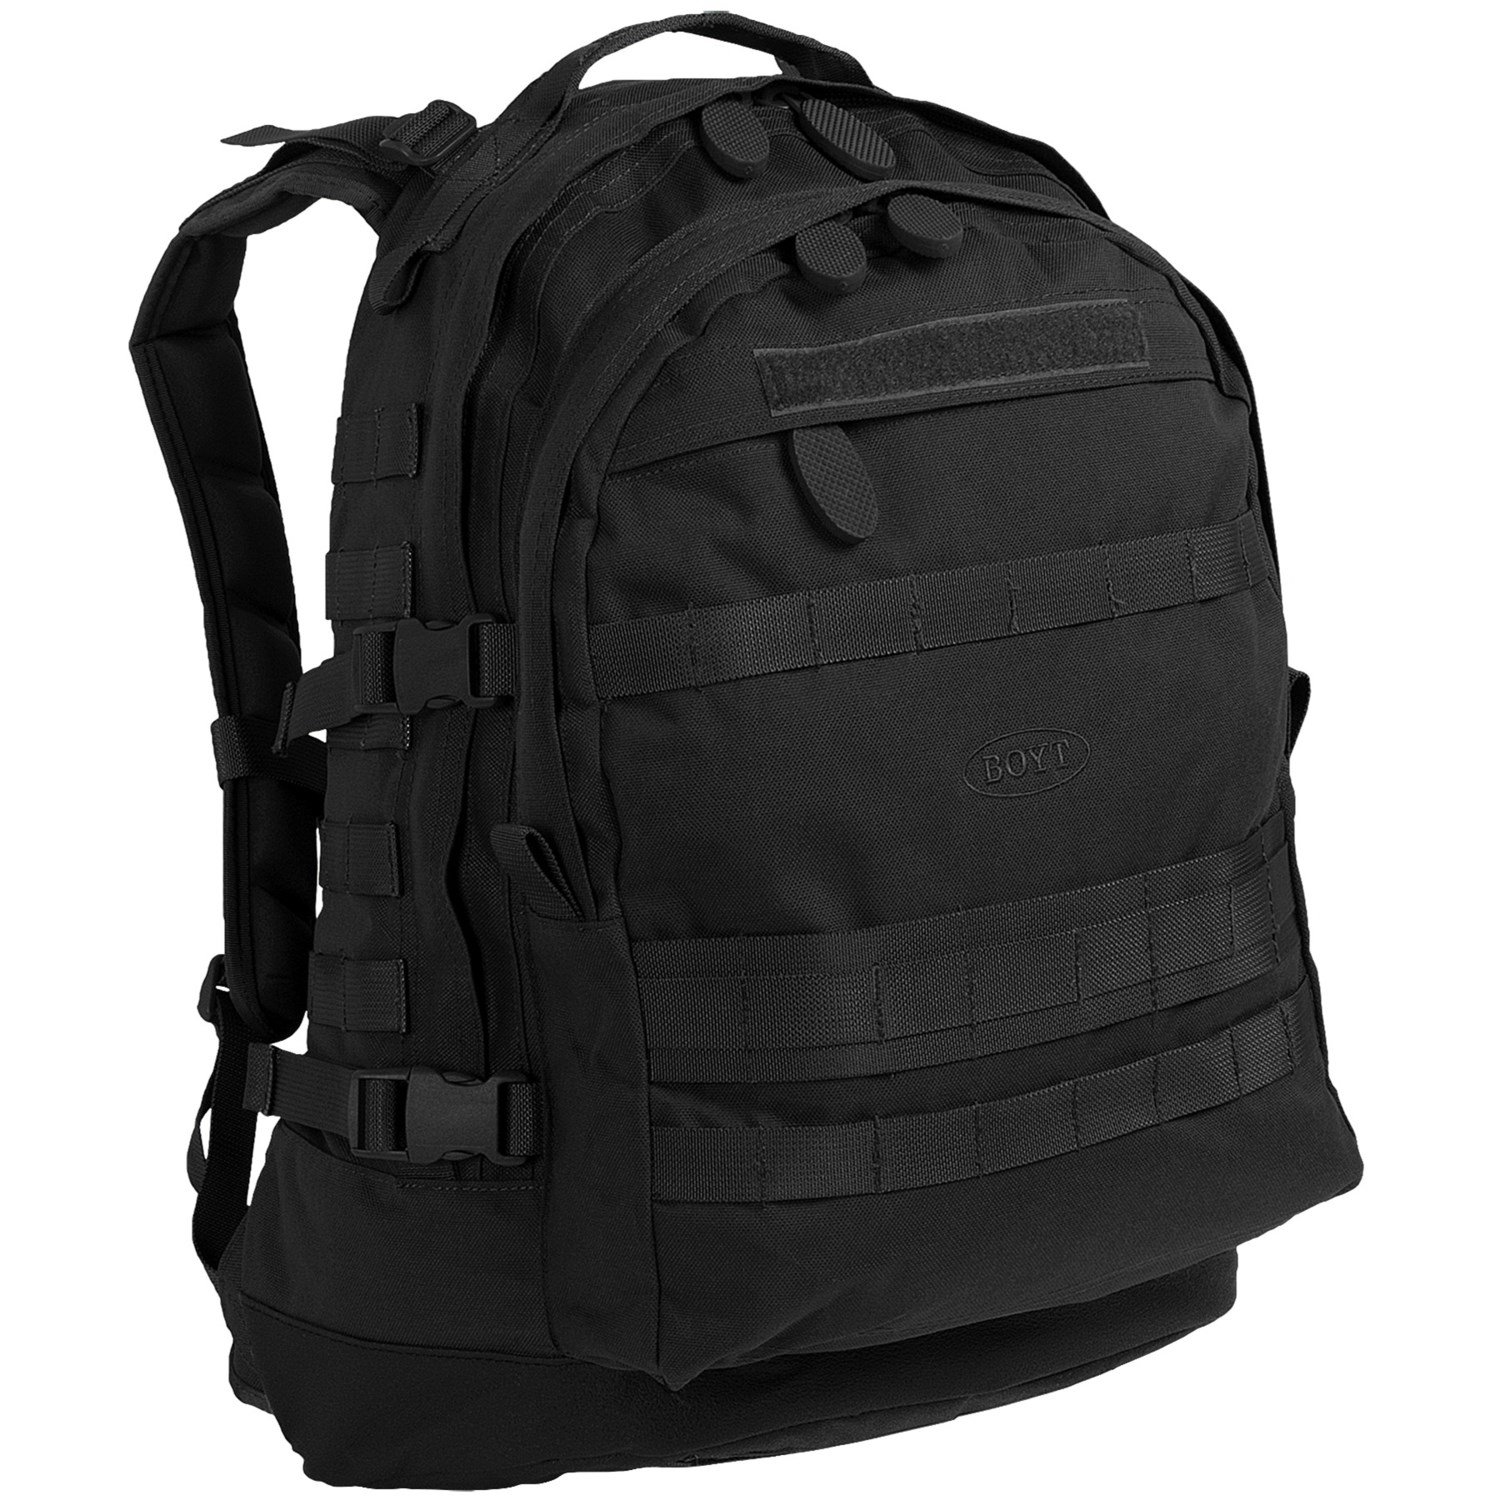 Boyt Harness Large Tactical Backpack 5053R - Save 35%